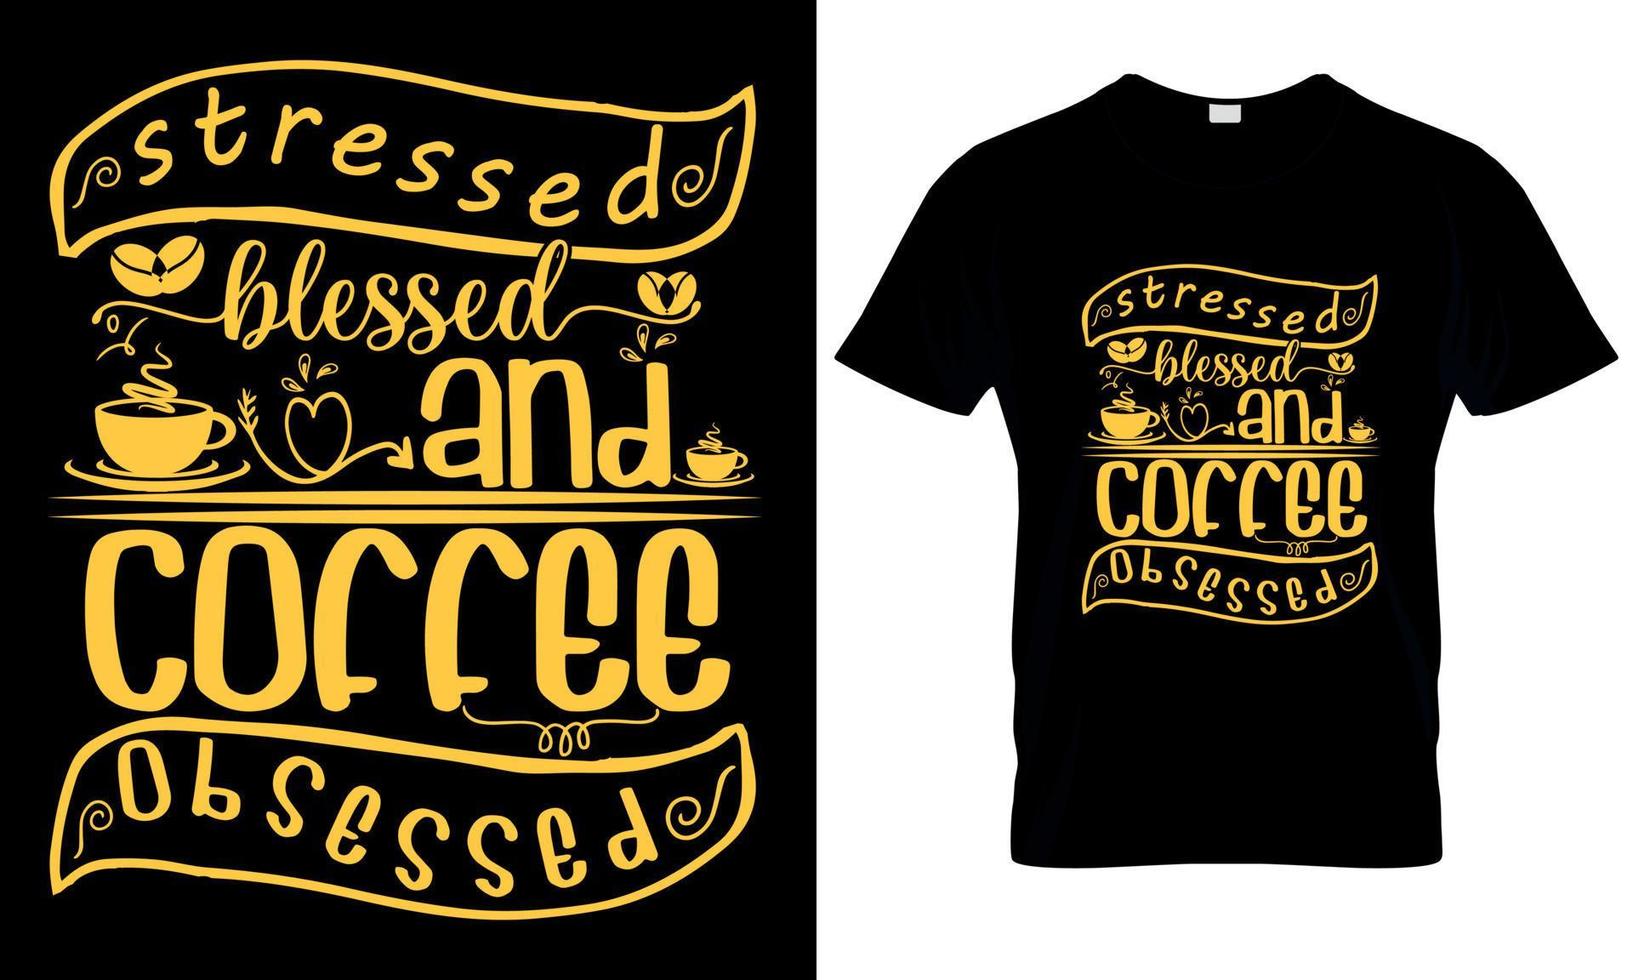 Stressed blessed and coffee obsessed t sahirt design vector